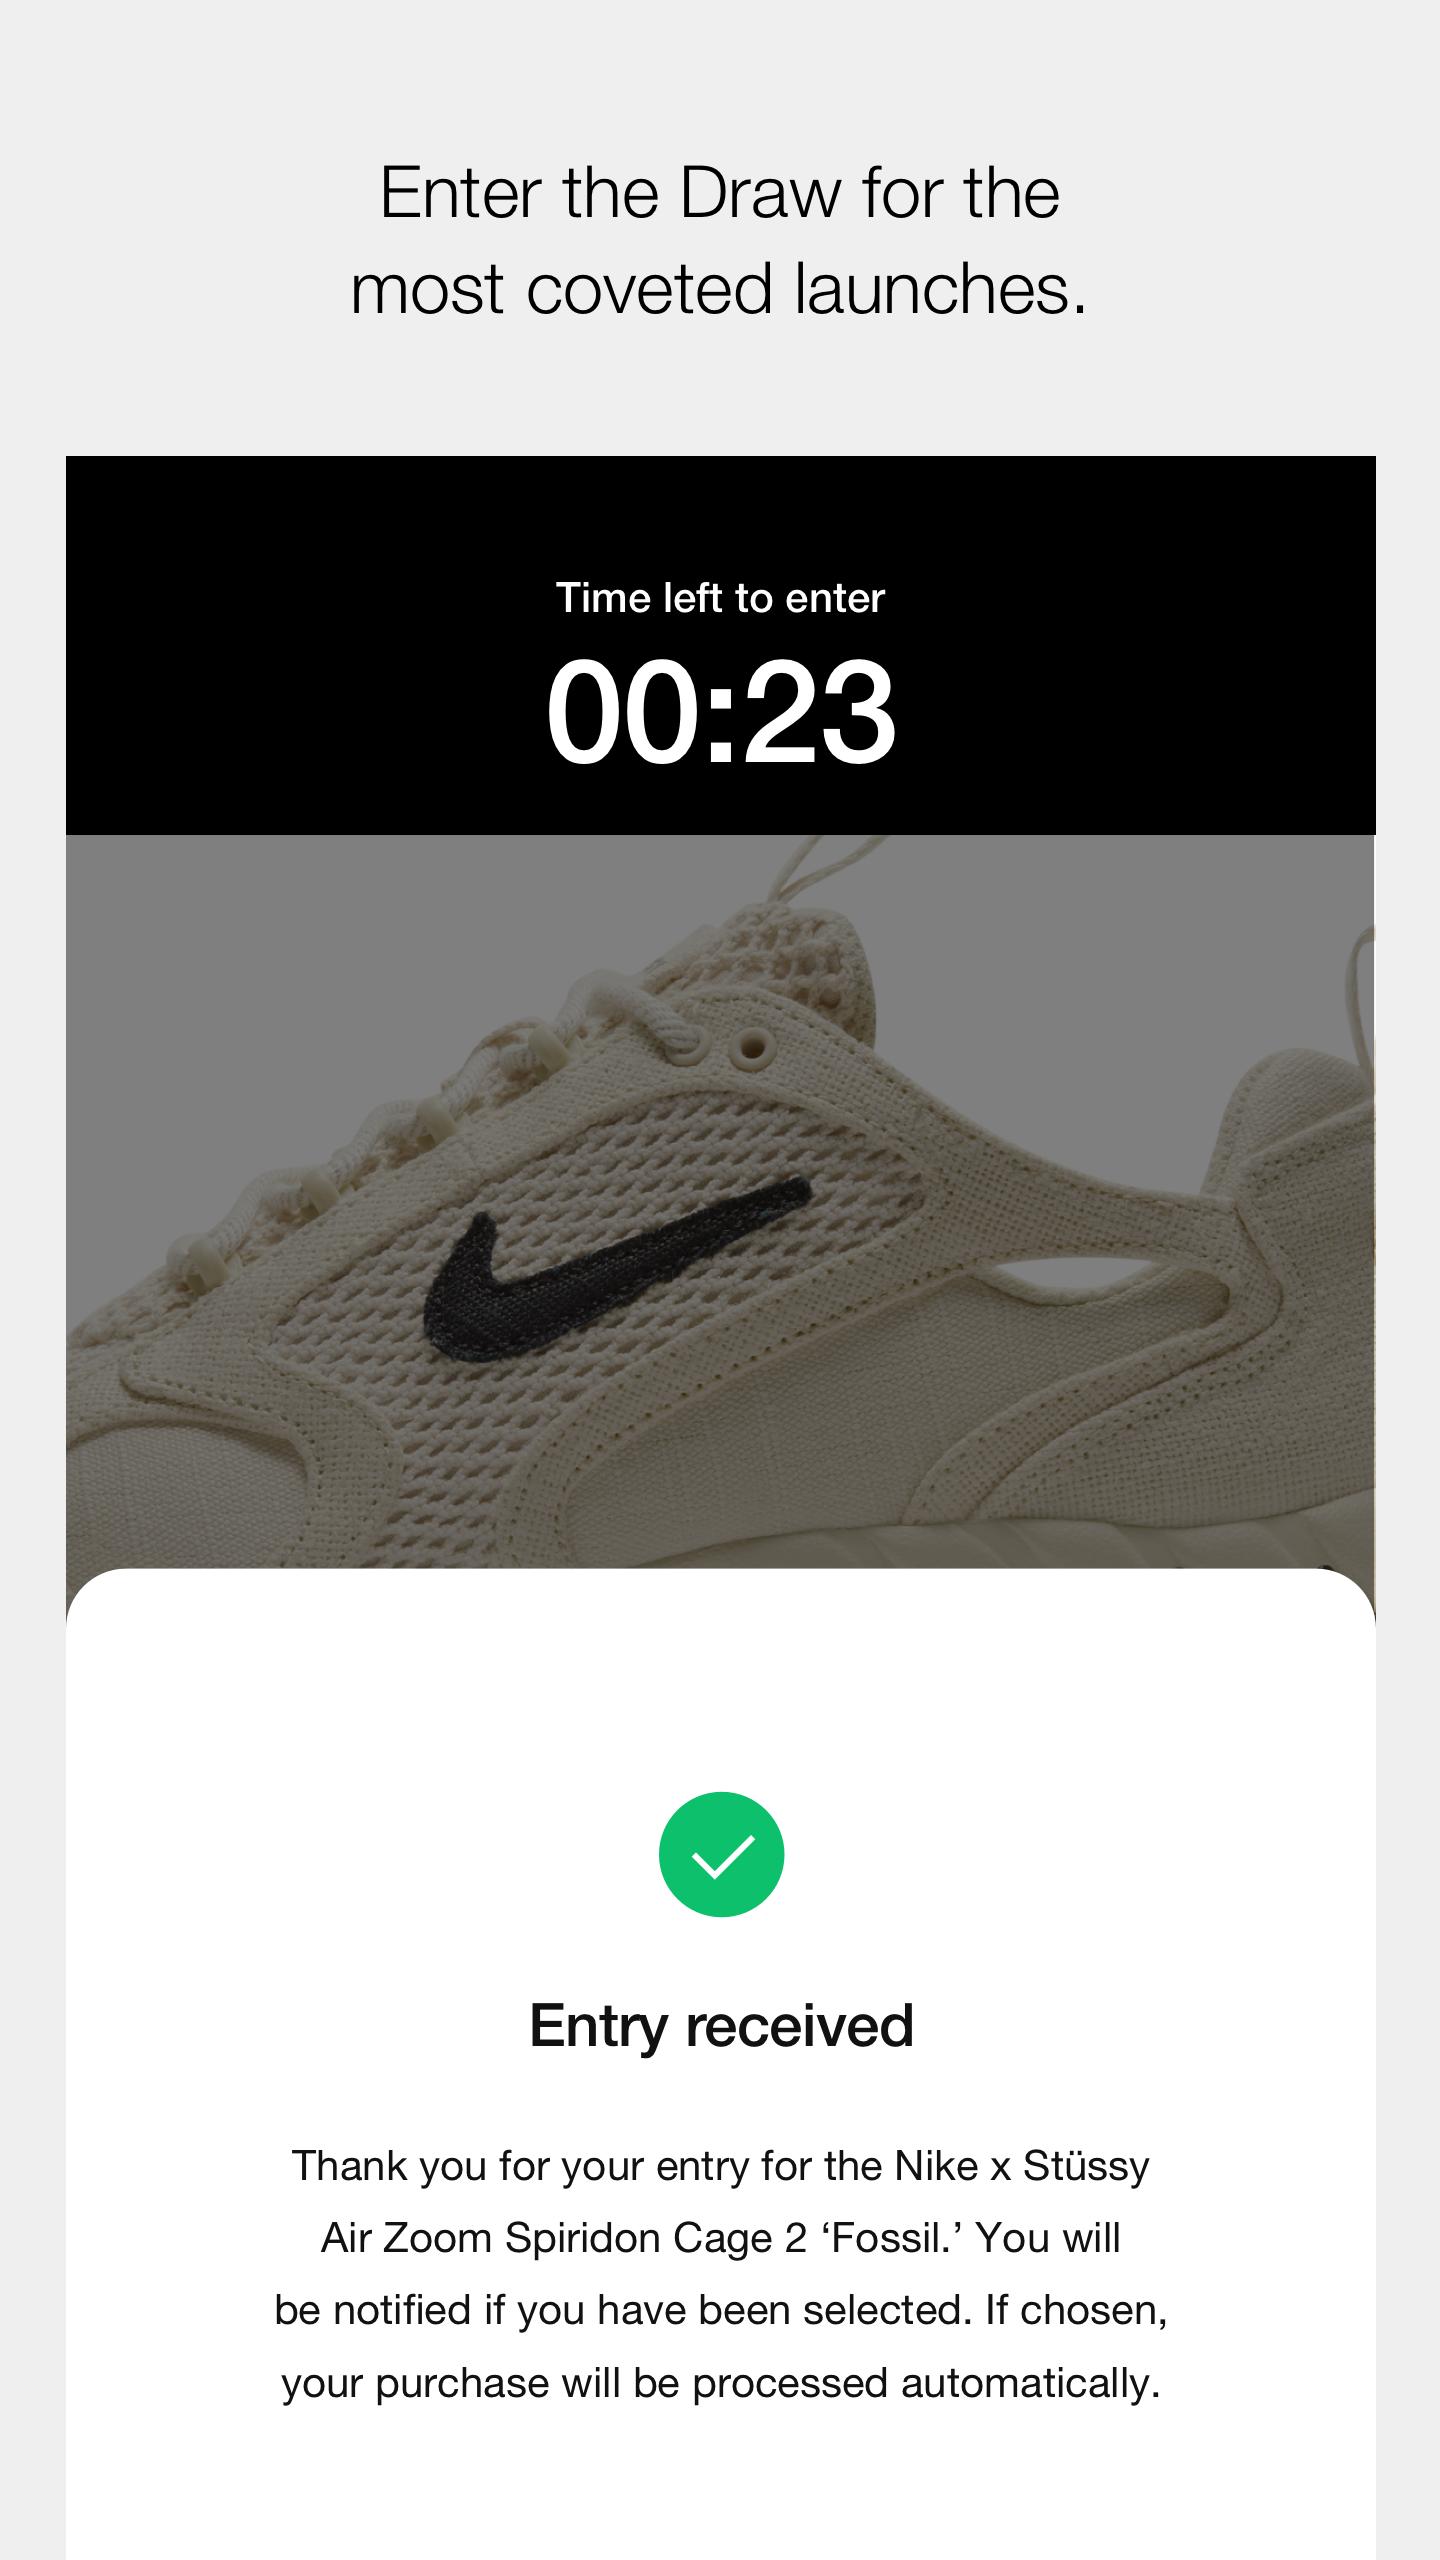 Nike SNKRS: Find & Buy The Latest Sneaker Releases 3.1.1 Screenshot 4